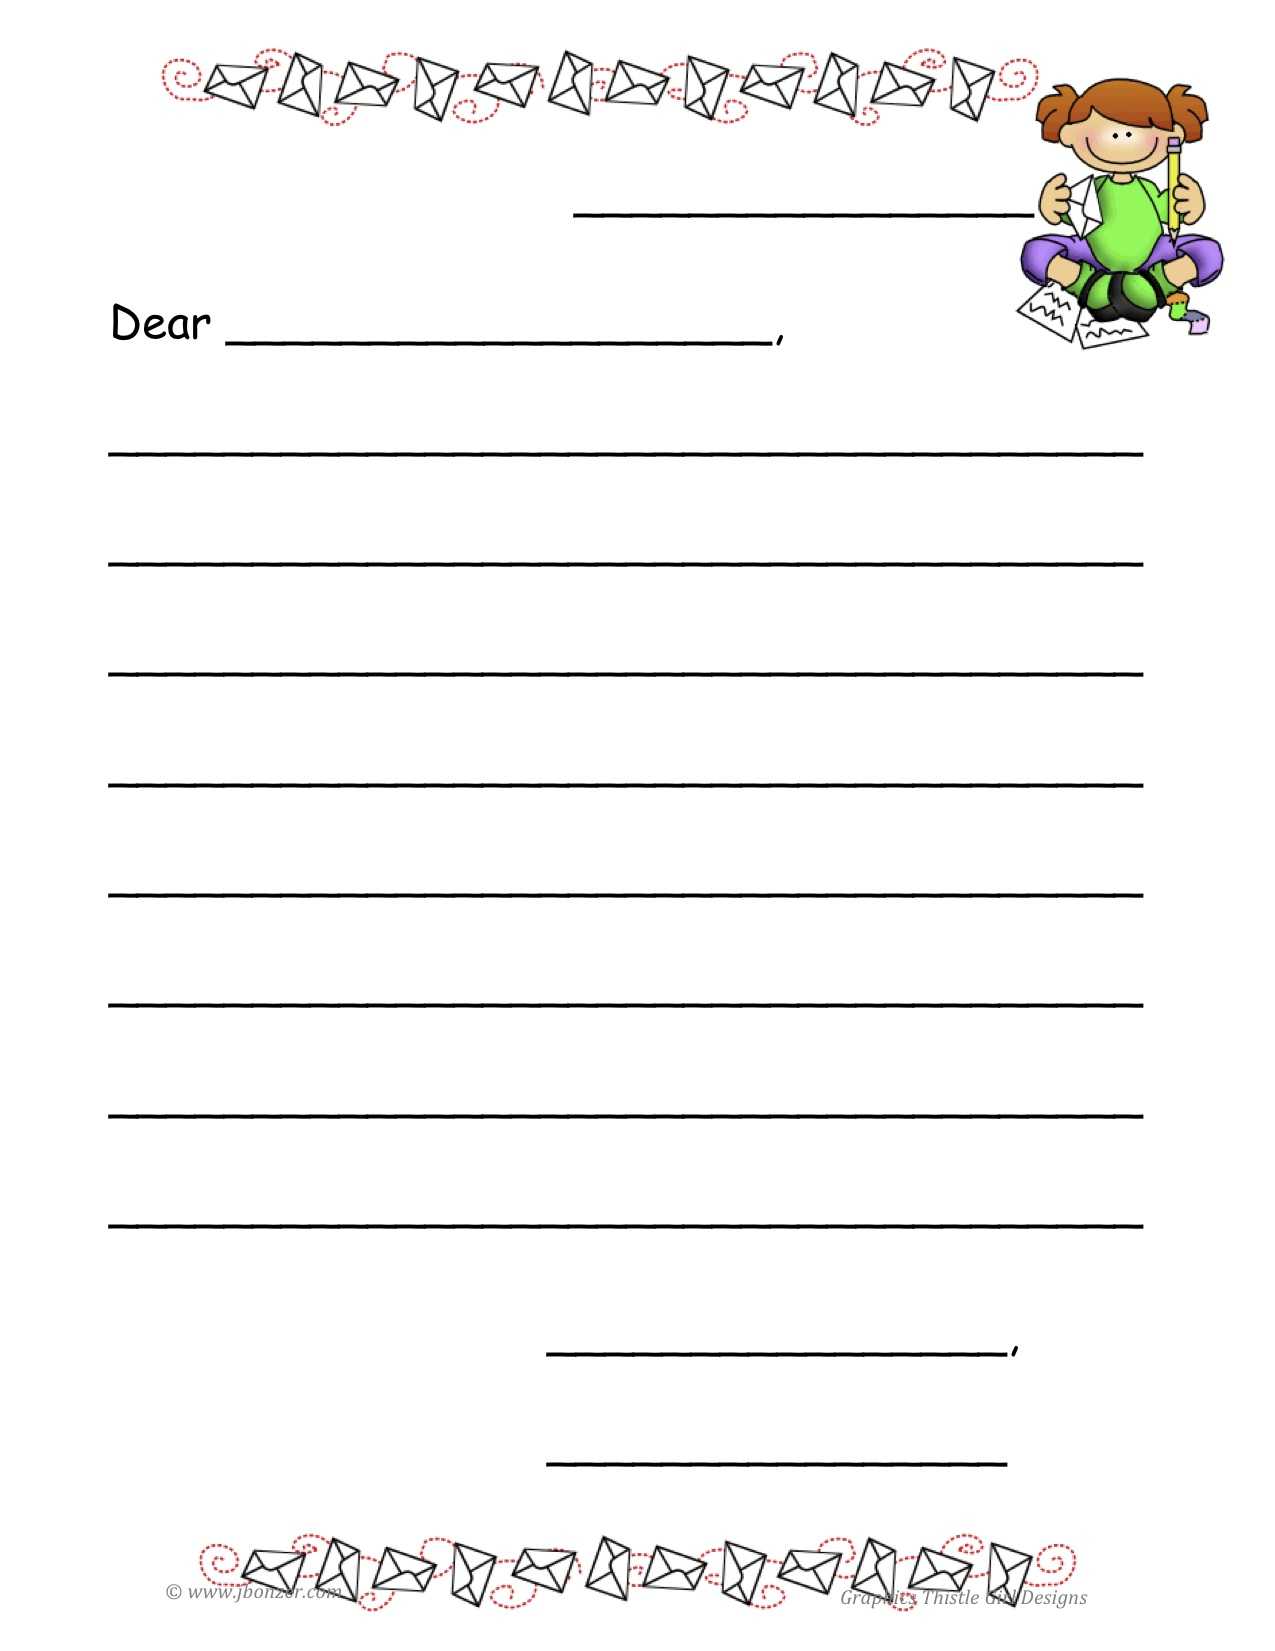 Nursery Rhyme Letter Writing. Letter Writing Can Be Fun Help With Blank Letter Writing Template For Kids